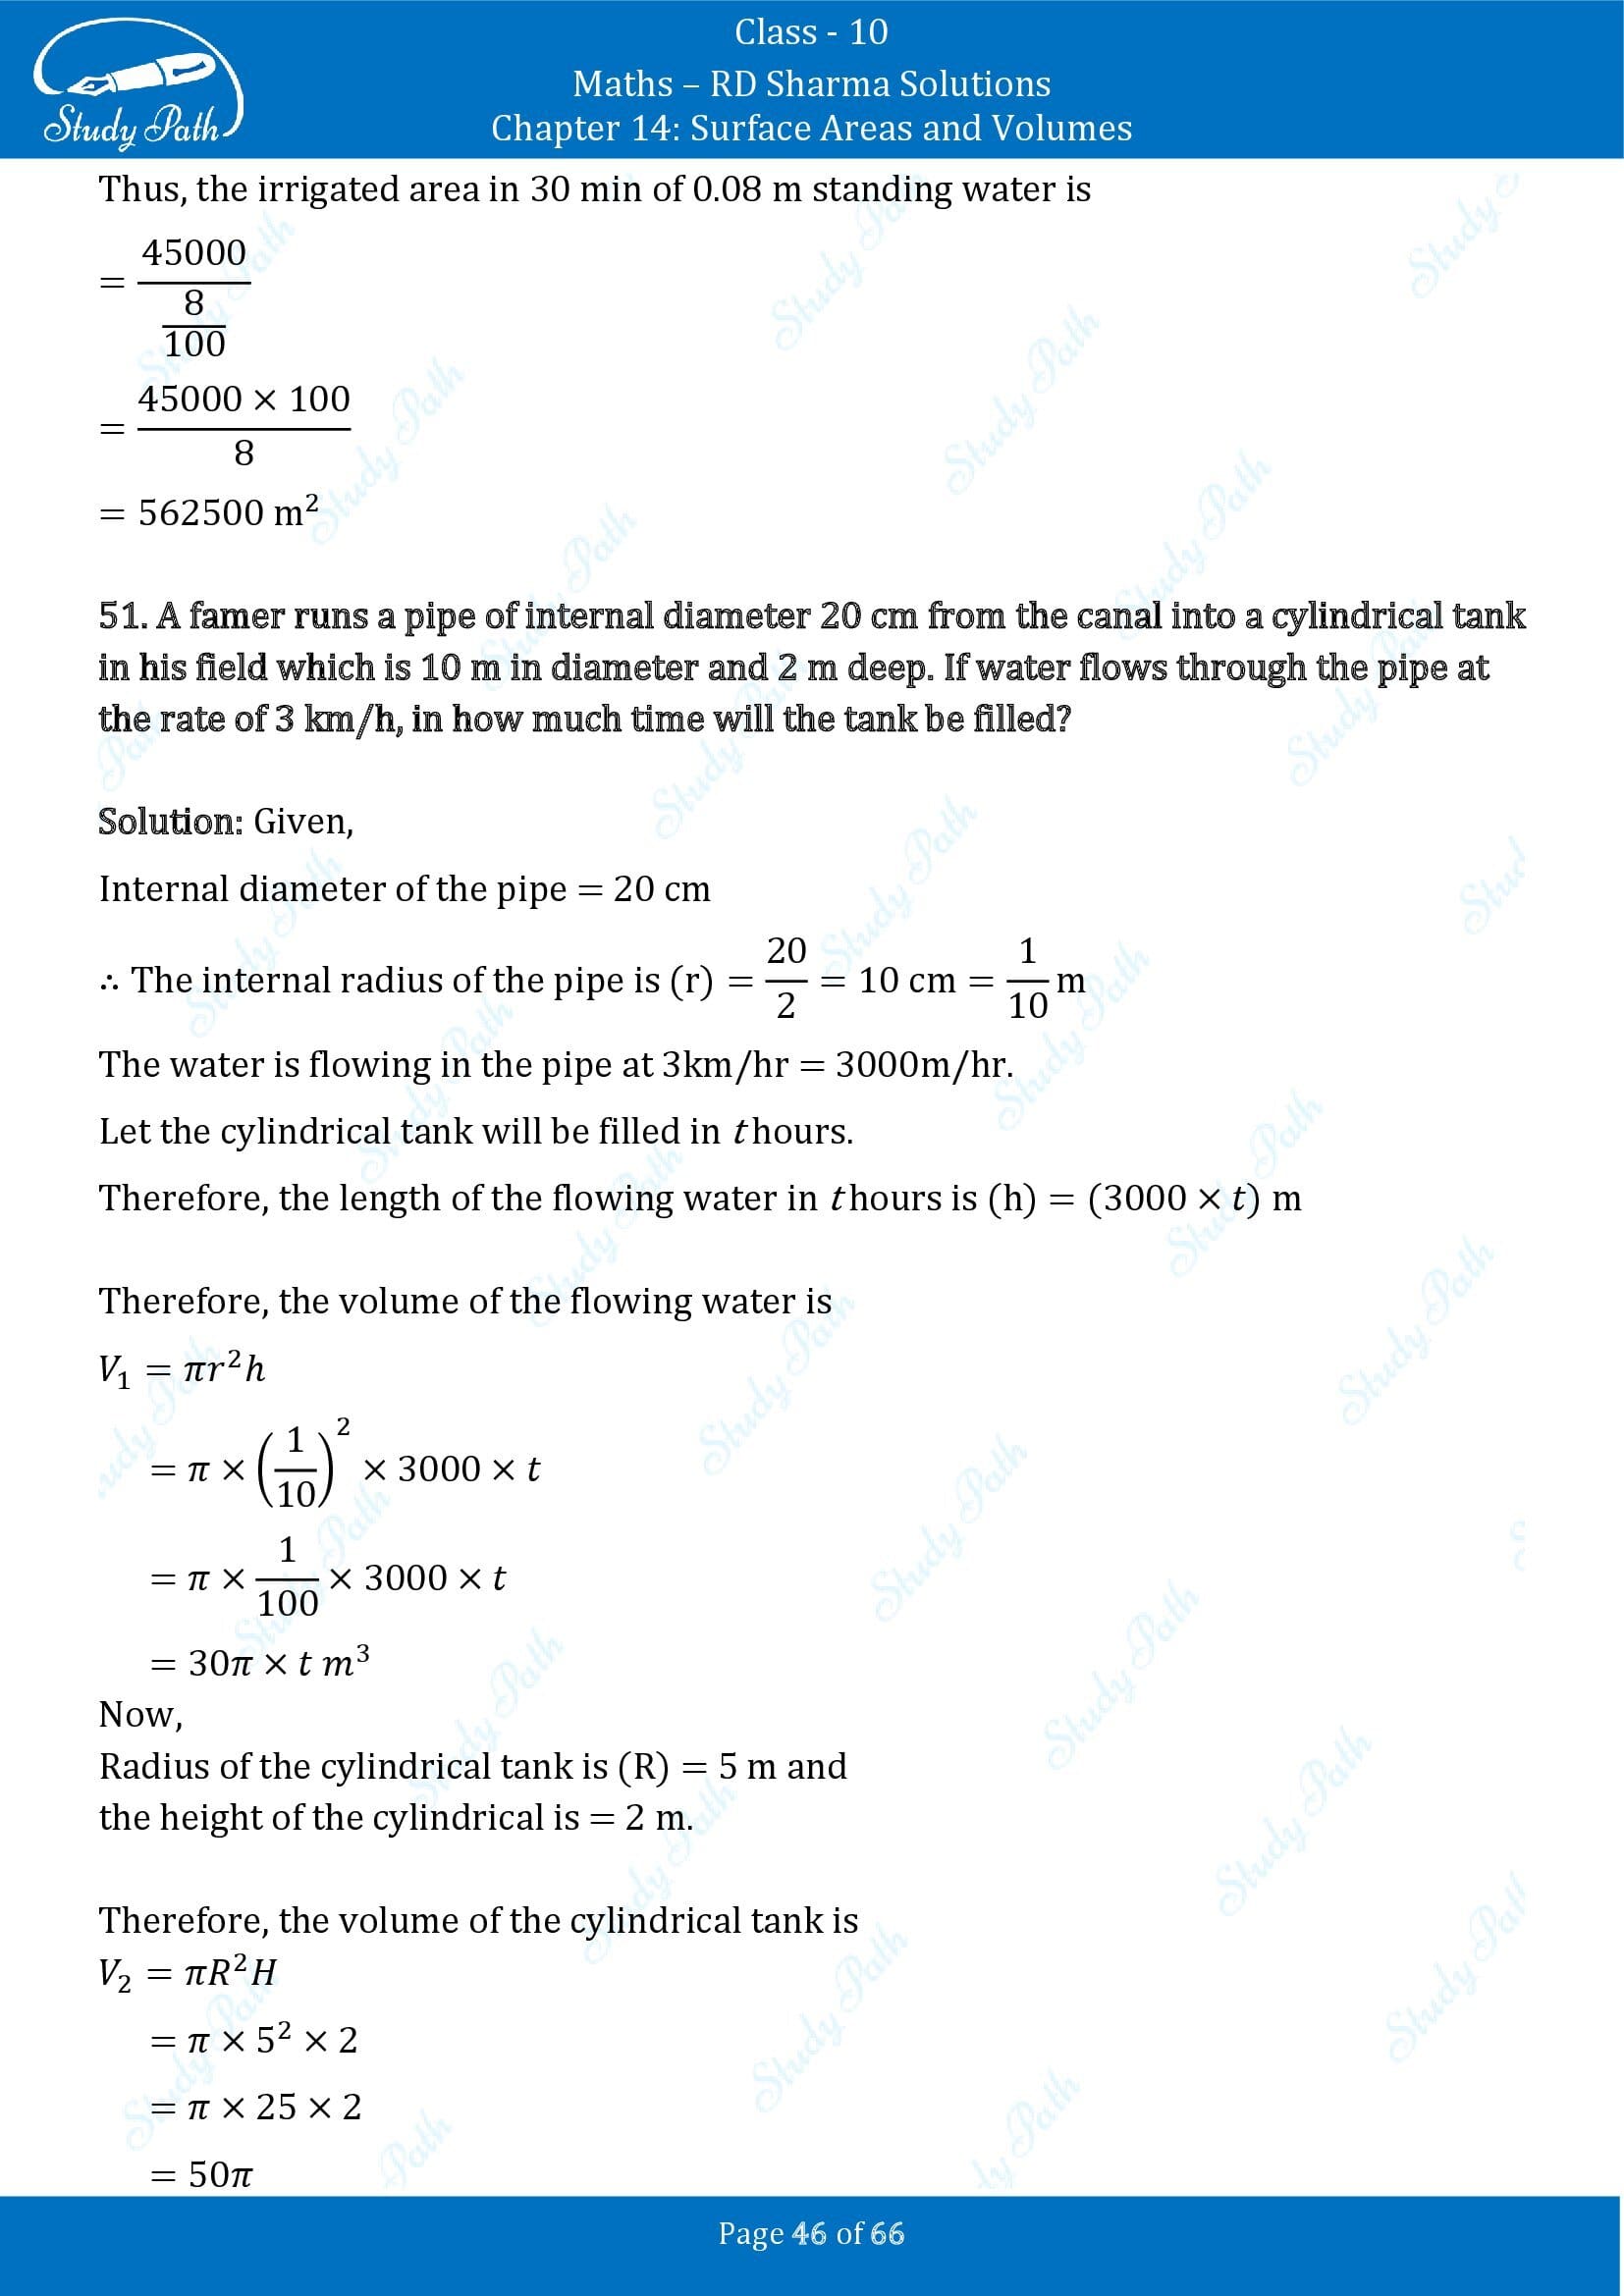 RD Sharma Solutions Class 10 Chapter 14 Surface Areas and Volumes Exercise 14.1 00046